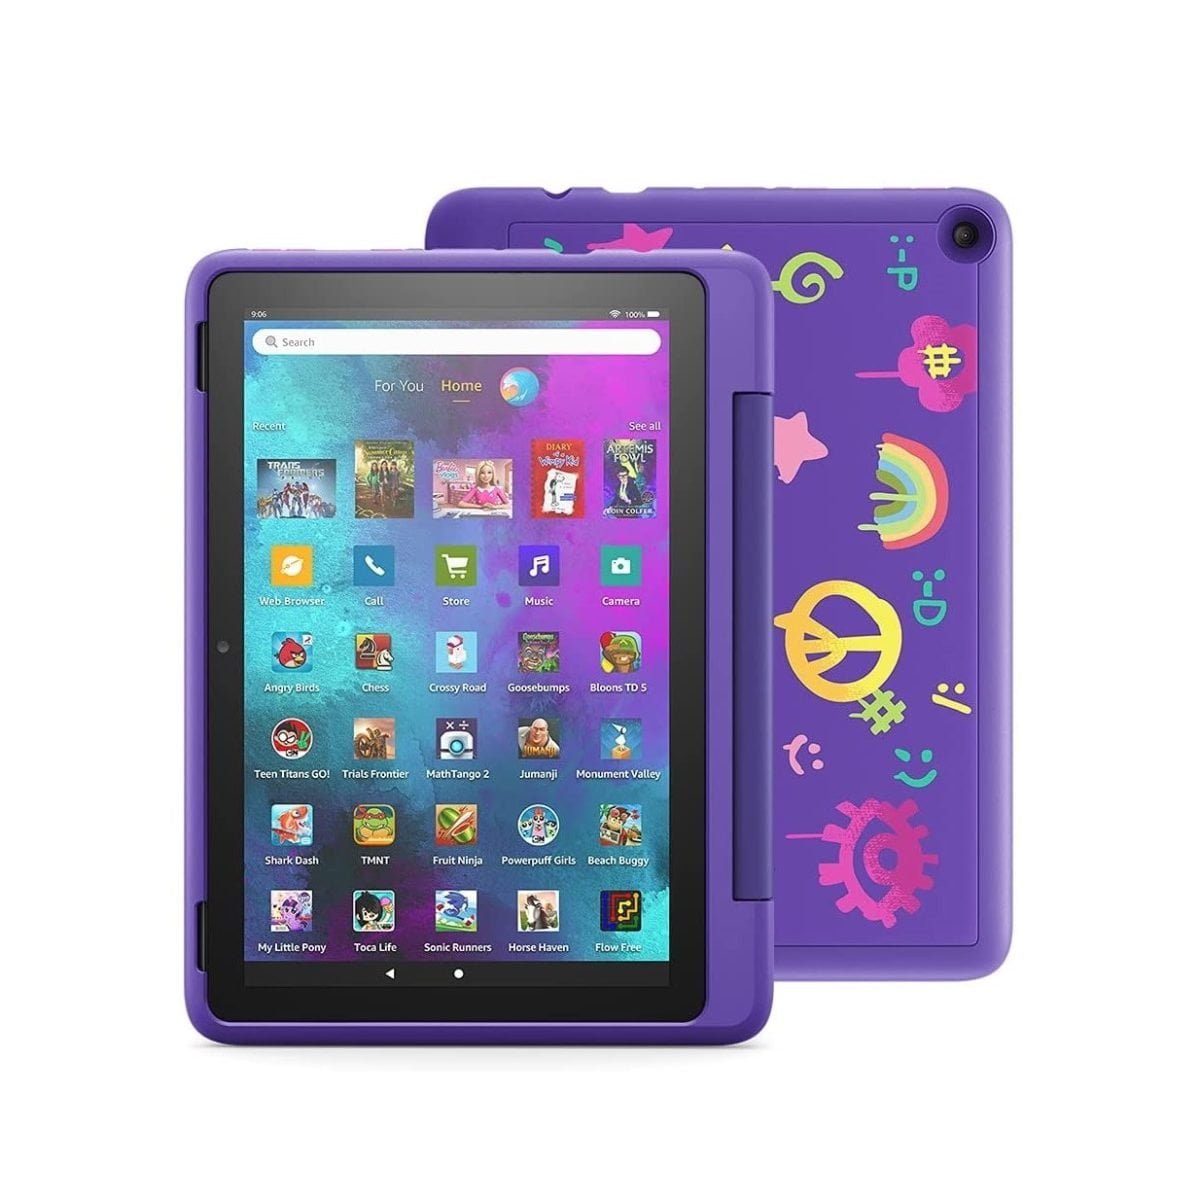 61Xqzcuolns. Ac Sl1000 Amazon &Amp;Lt;H1&Amp;Gt;Fire Hd 10 Kids Pro Tablet, 10.1&Amp;Quot;, 1080P Full Hd 11Th Generation, Ages 6–12, 32 Gb, Doodle&Amp;Lt;/H1&Amp;Gt; &Amp;Lt;Ul Class=&Amp;Quot;A-Unordered-List A-Vertical A-Spacing-Mini&Amp;Quot;&Amp;Gt; &Amp;Lt;Li&Amp;Gt;&Amp;Lt;Span Class=&Amp;Quot;A-List-Item&Amp;Quot;&Amp;Gt;Features An Octa-Core Processor, 3 Gb Ram, 10.1&Amp;Quot; Full Hd Display, Dual Cameras, Usb-C (2.0) Port, And Up To 1 Tb Of Expandable Storage. Screen Made With Strengthened Aluminosilicate Glass.&Amp;Lt;/Span&Amp;Gt;&Amp;Lt;/Li&Amp;Gt; &Amp;Lt;Li&Amp;Gt;&Amp;Lt;Span Class=&Amp;Quot;A-List-Item&Amp;Quot;&Amp;Gt;In Addition To Kids+ Content, Kids Pro Tablets Include Access To A Digital Store. Kids Can Request Apps, While Parents Approve Purchases And Downloads. Plus, Parents Can Add Access To More Apps Like Minecraft And Zoom.&Amp;Lt;/Span&Amp;Gt;&Amp;Lt;/Li&Amp;Gt; &Amp;Lt;Li&Amp;Gt;&Amp;Lt;Span Class=&Amp;Quot;A-List-Item&Amp;Quot;&Amp;Gt;The Web Browser Comes With Built-In Controls Designed To Help Filter Out Inappropriate Sites And Let Parents Add Or Block Specific Websites At Any Time.&Amp;Lt;/Span&Amp;Gt;&Amp;Lt;/Li&Amp;Gt; &Amp;Lt;Li&Amp;Gt;&Amp;Lt;Span Class=&Amp;Quot;A-List-Item&Amp;Quot;&Amp;Gt;Stay In Touch – Kids Can Send Announcements And Make Voice And Video Calls Over Wifi To Approved Contacts With An Alexa-Enabled Device Or The Alexa App.&Amp;Lt;/Span&Amp;Gt;&Amp;Lt;/Li&Amp;Gt; &Amp;Lt;/Ul&Amp;Gt; Fire Hd 10 Fire Hd 10 Kids Pro Tablet, 10.1&Amp;Quot;, 1080P Full Hd 11Th Generation, Ages 6–12, 32 Gb, Doodle